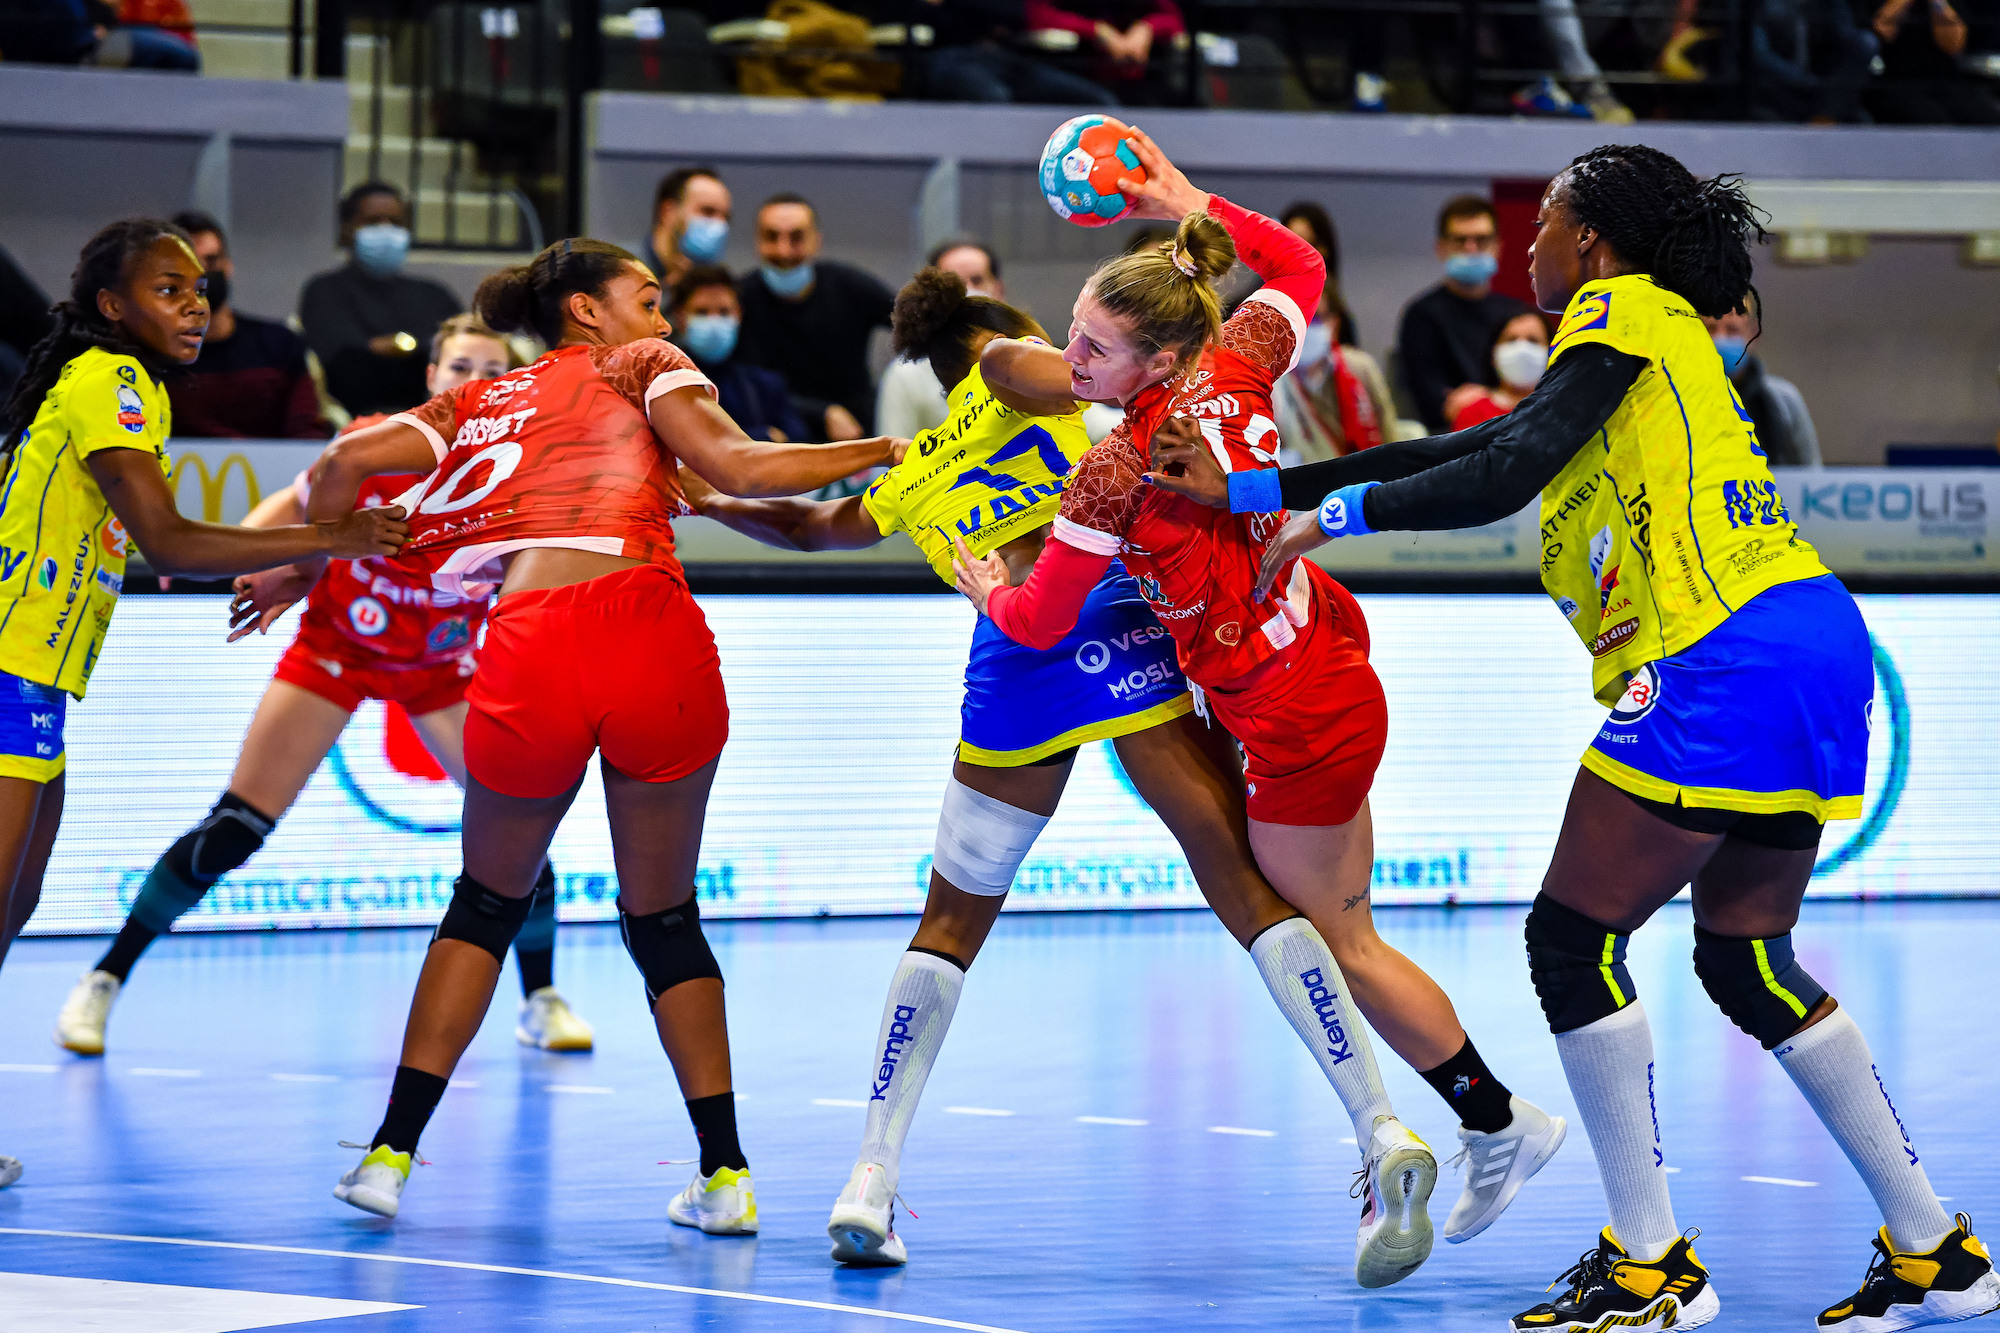 Line UNO of Besancon during the French Ligue Butagaz Energie women’s handball match between Besancon and Metz on February 2, 2022 in Besancon, France. (Photo by Baptiste Fernandez/Icon Sport)